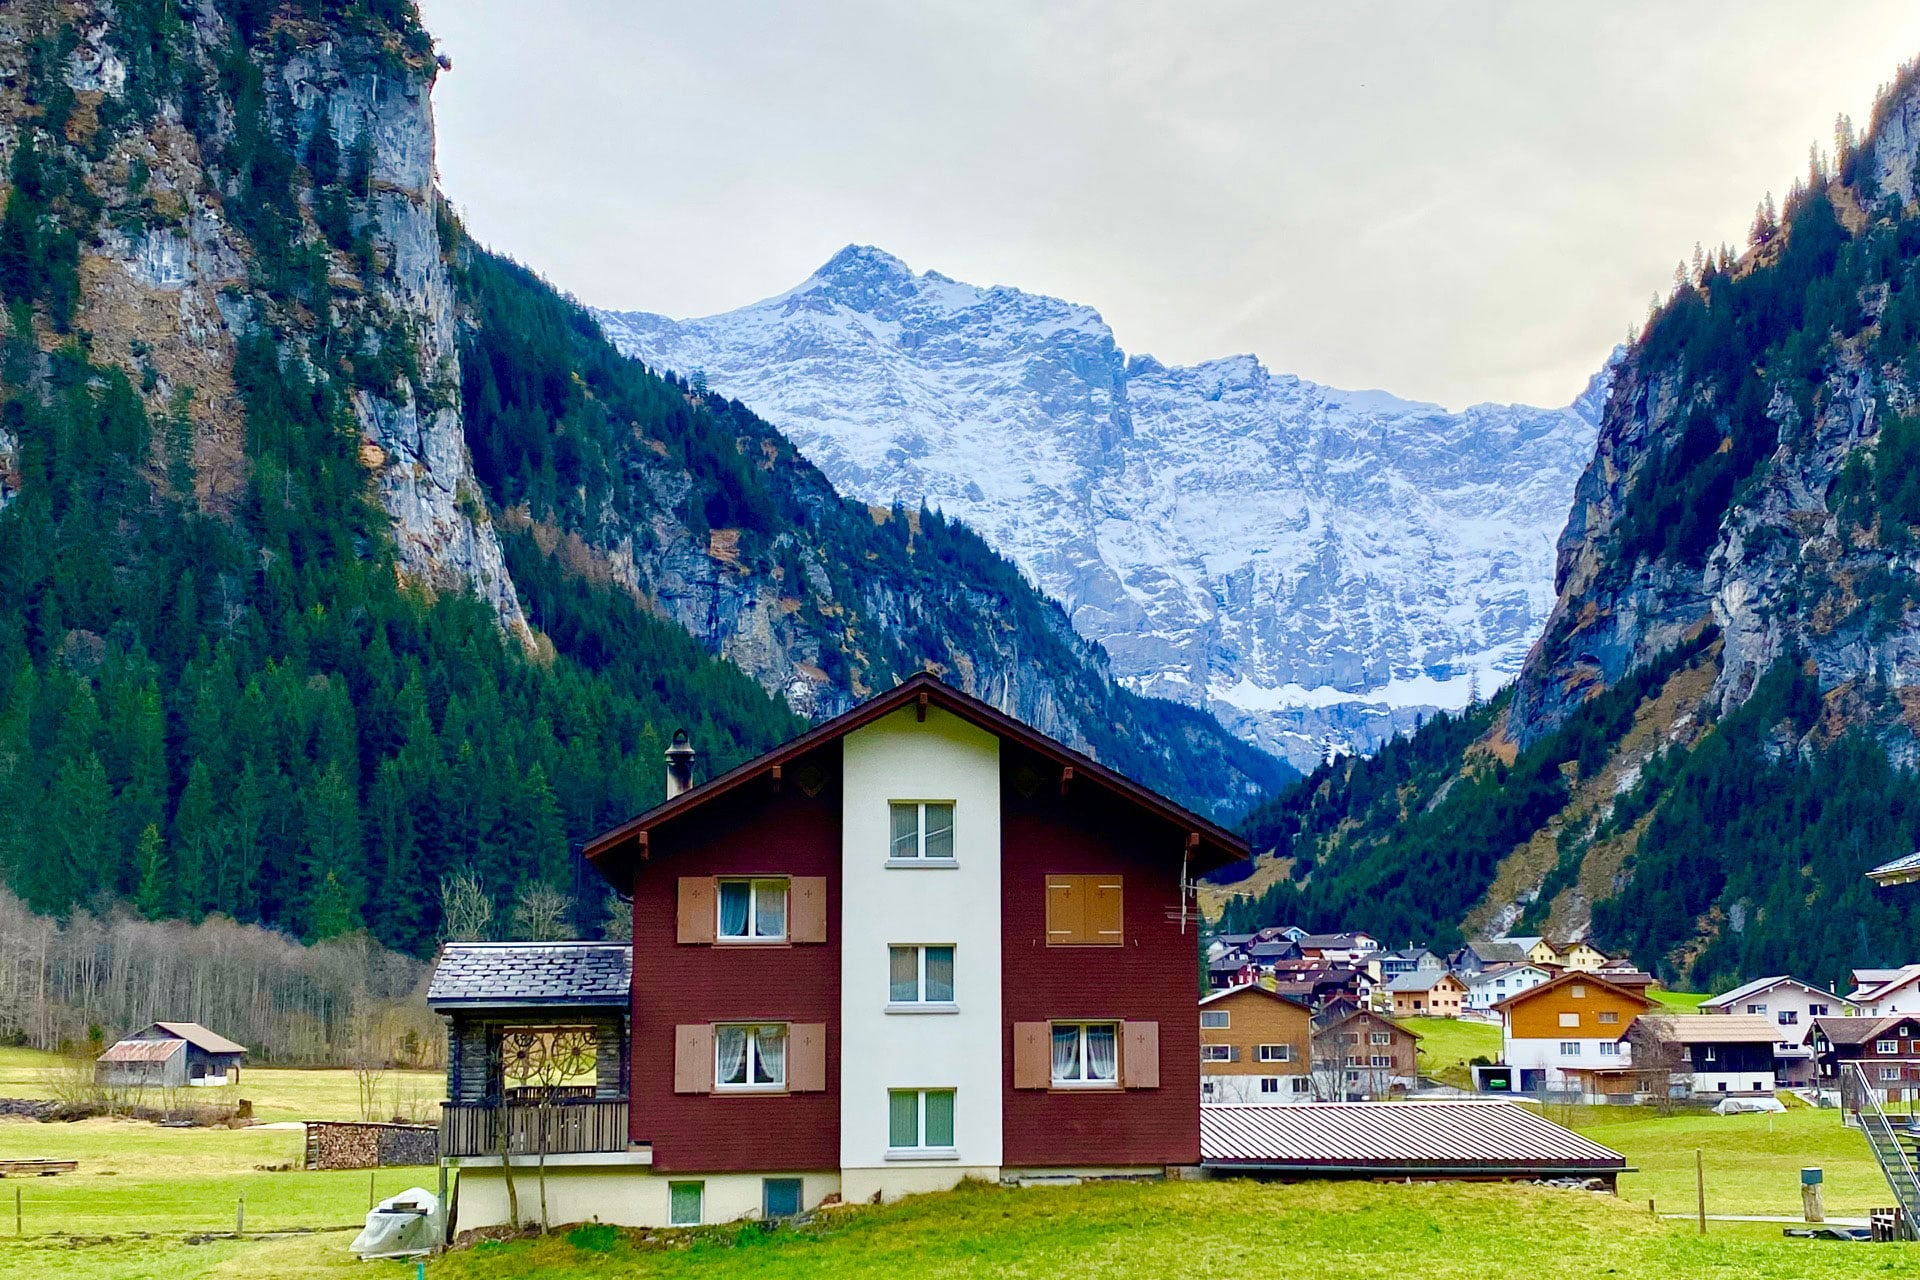 Swiss Alps & Mountain Villages Private Day Tour (from Zurich)